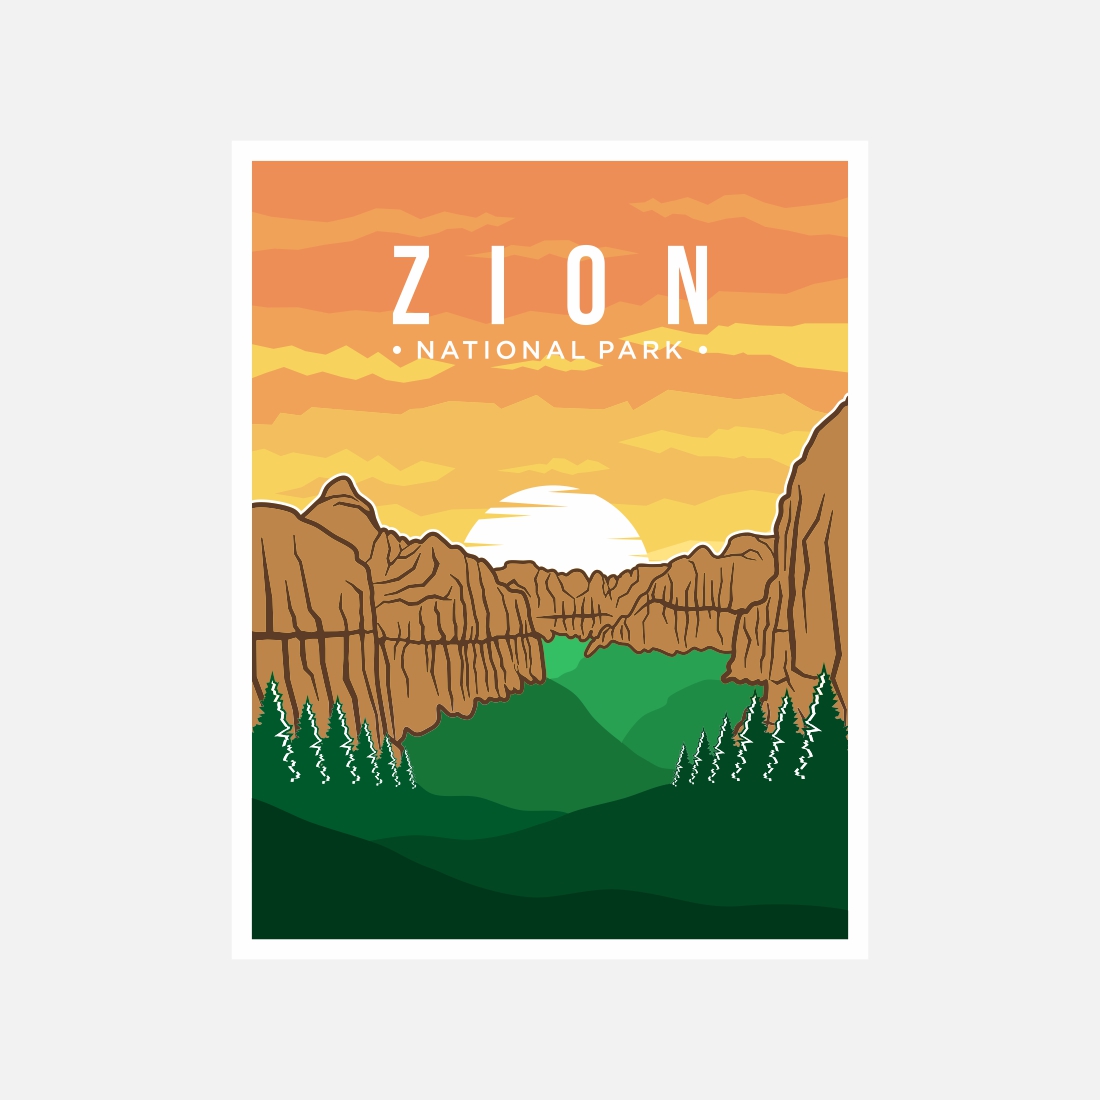 Zion National Park poster vector illustration design – Only $8 preview image.